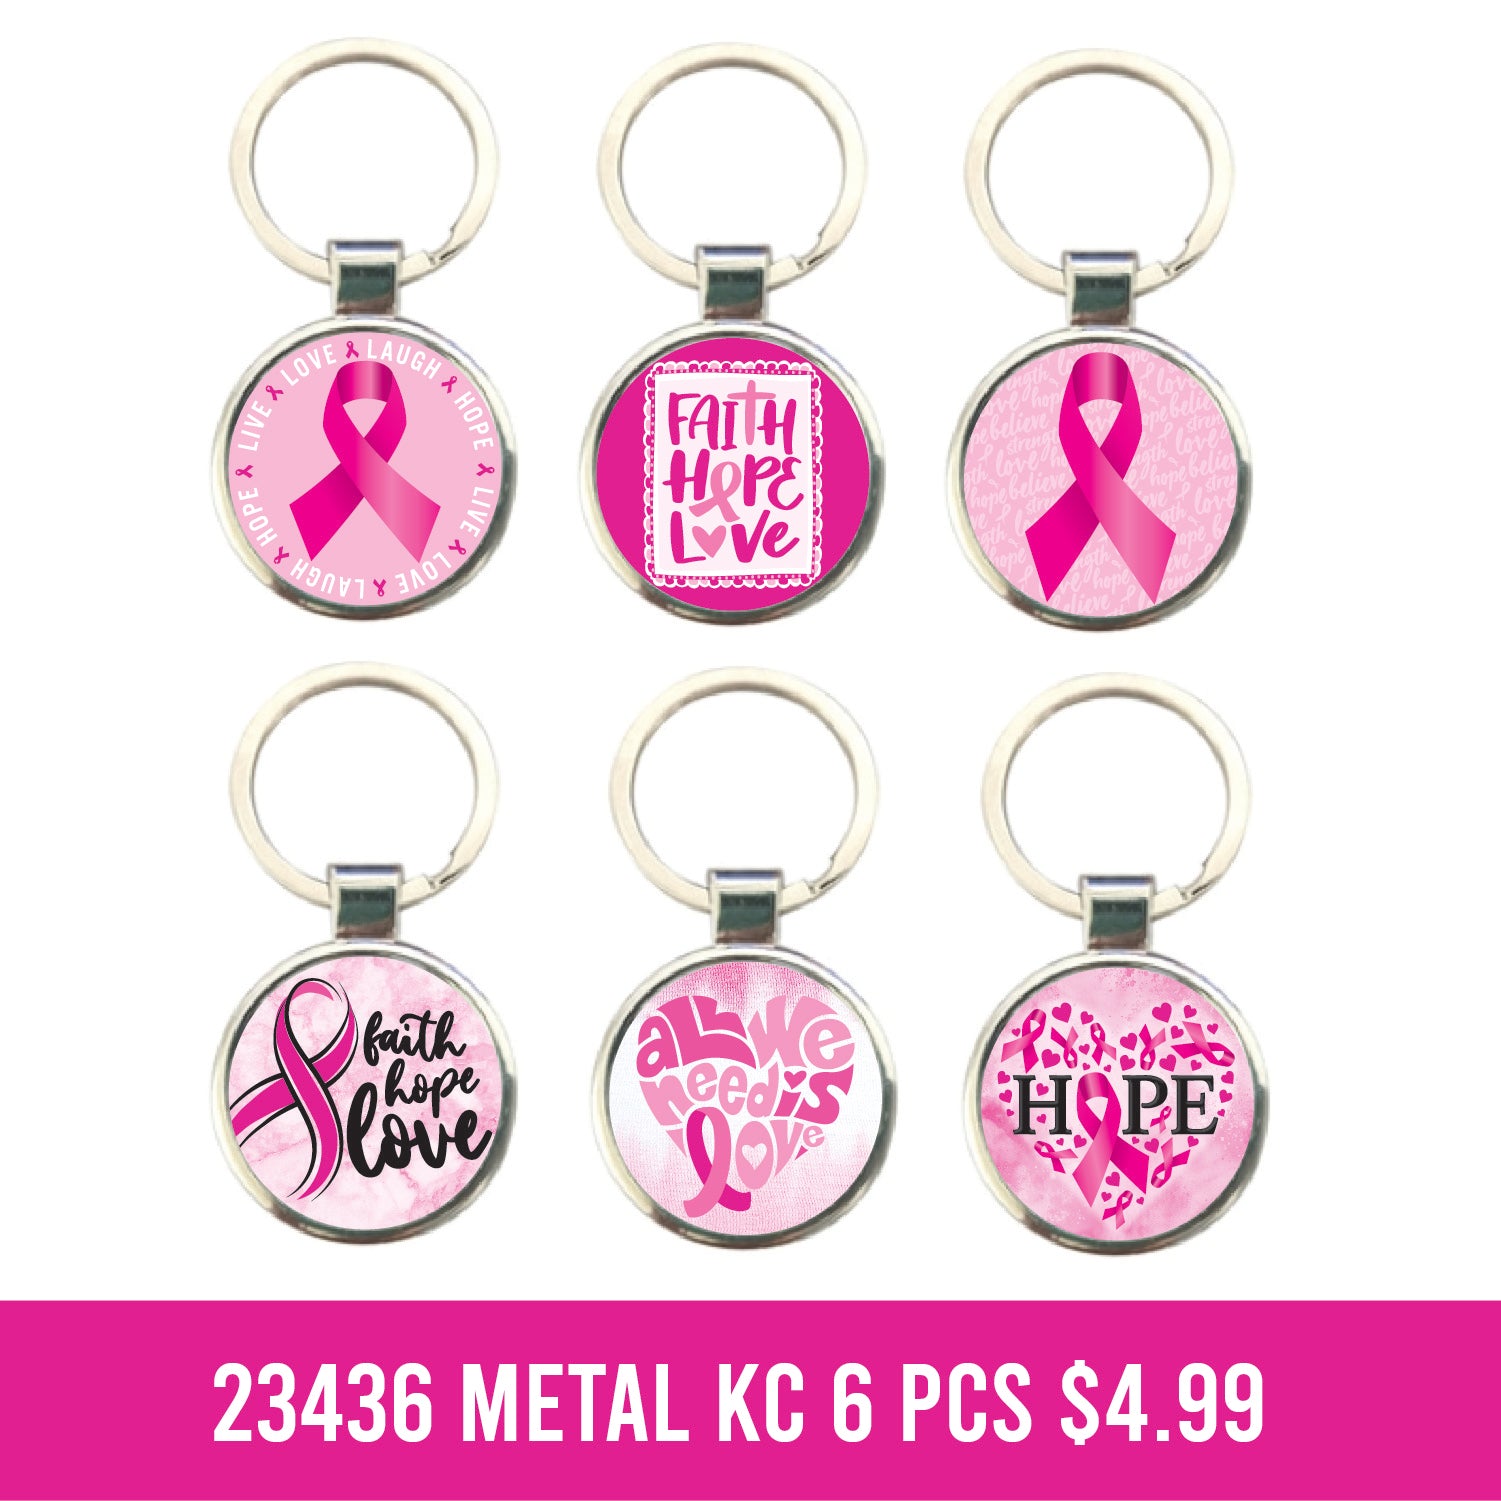 Keychain – Pink Glitter Circle – A Pampered Place